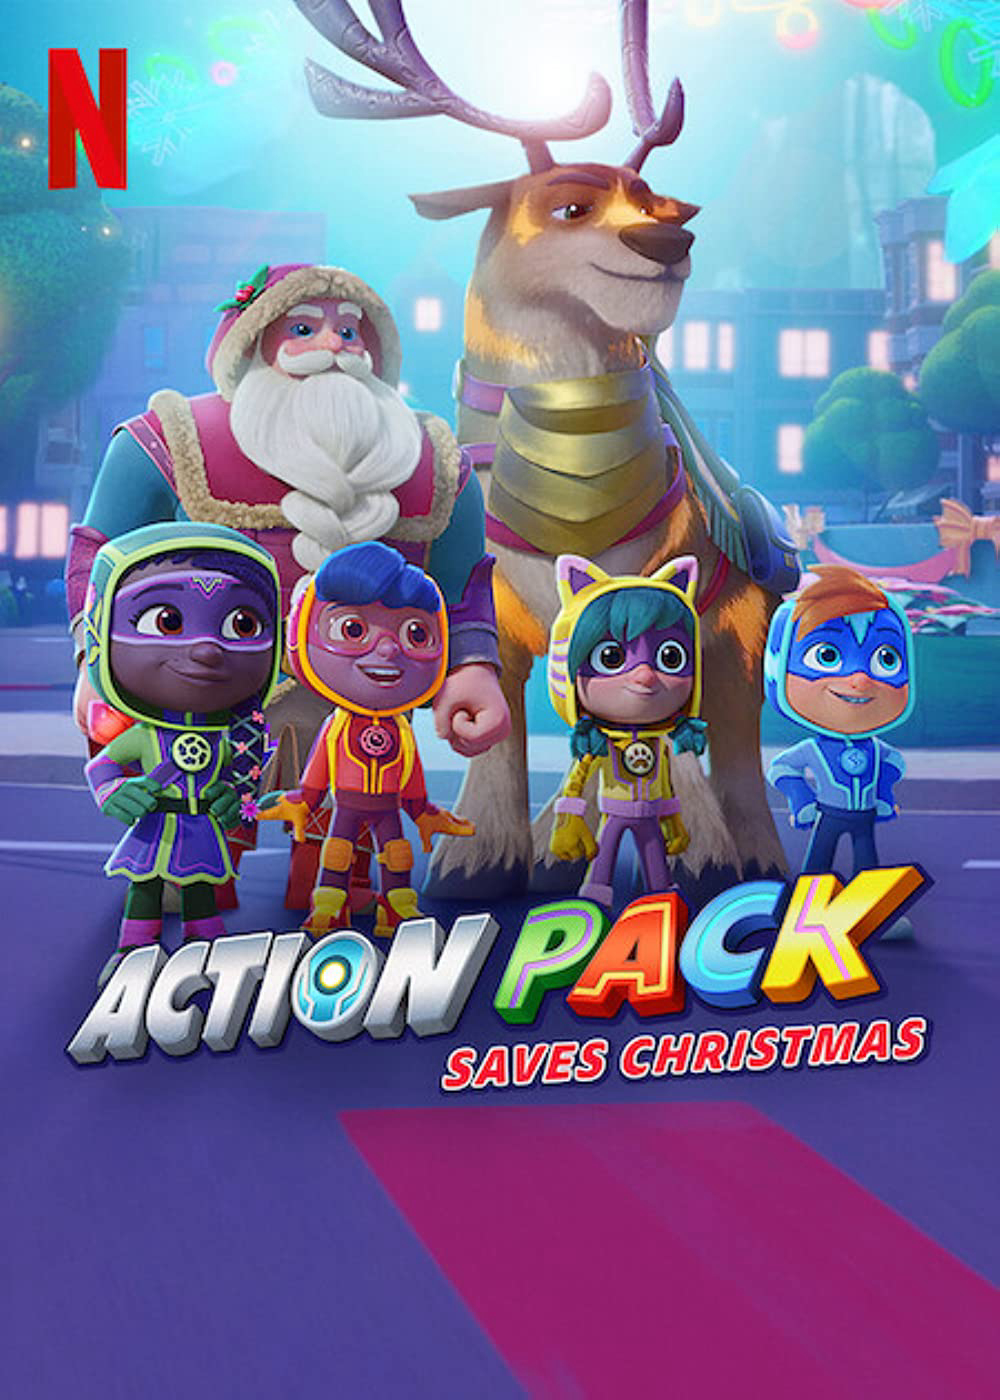 Poster Phim Action Pack giải cứu Giáng sinh (The Action Pack Saves Christmas)